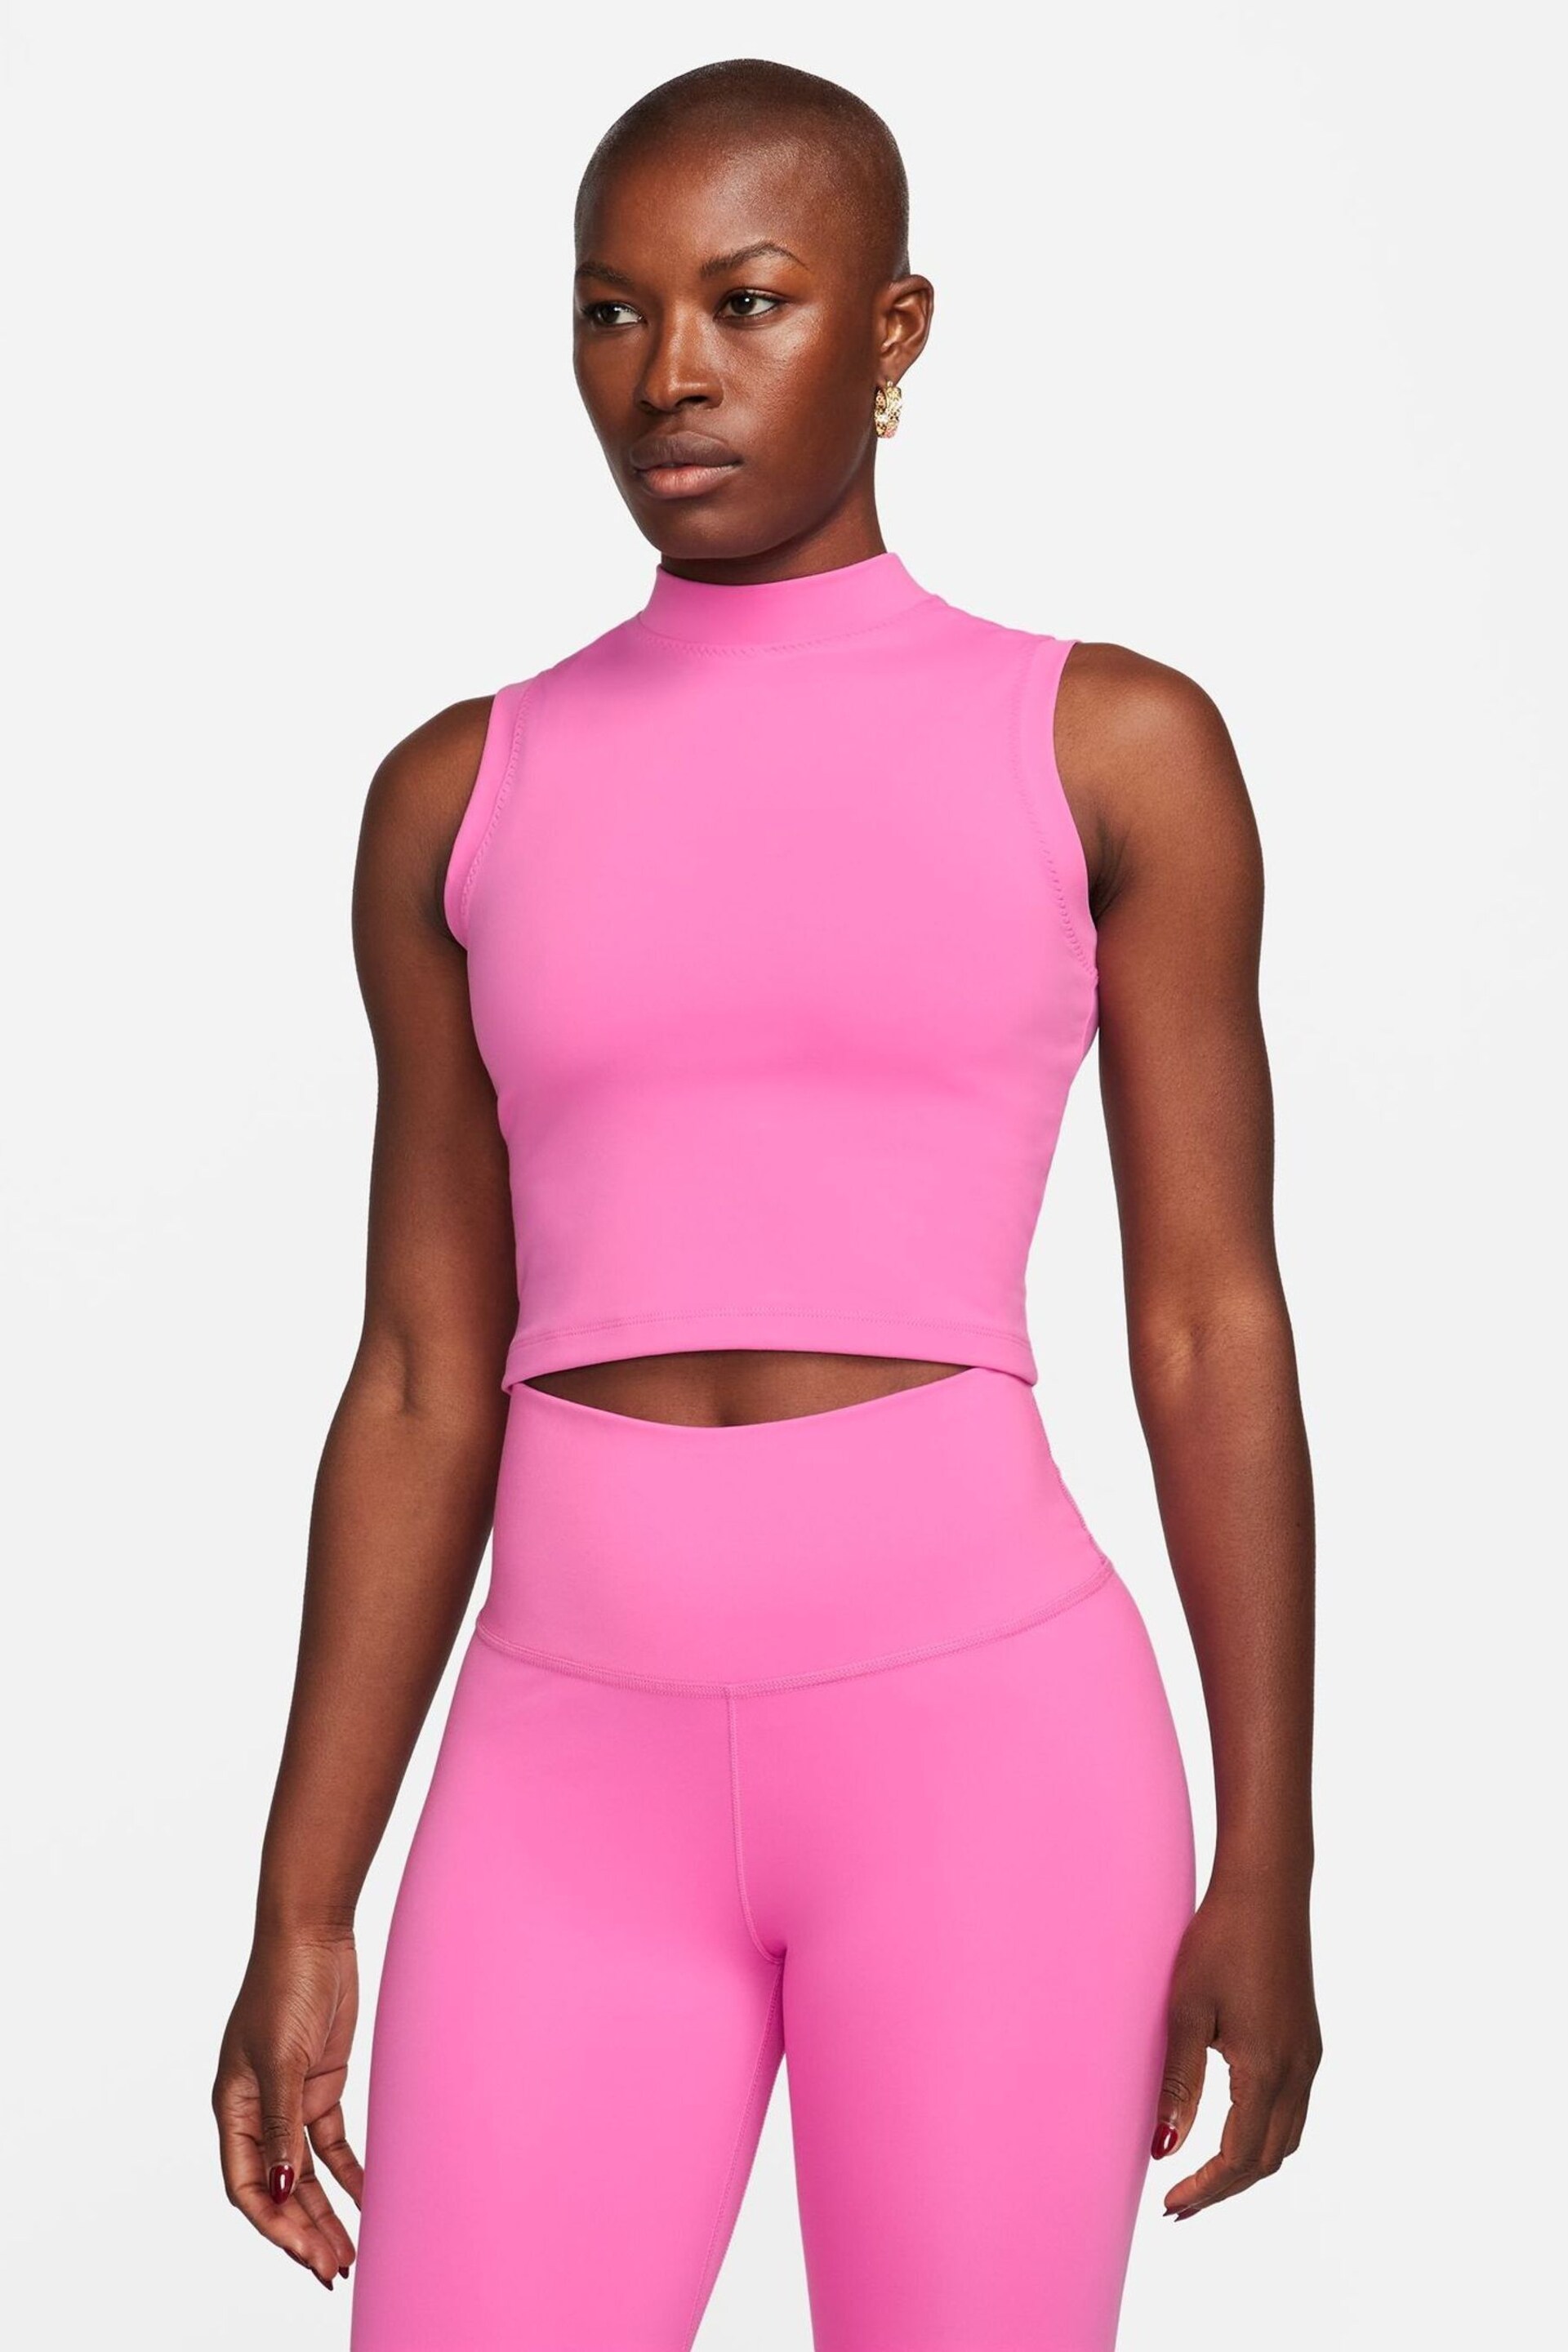 Nike Pink One Dri-FIT Mock Neck Cropped Tank Top - Image 1 of 9